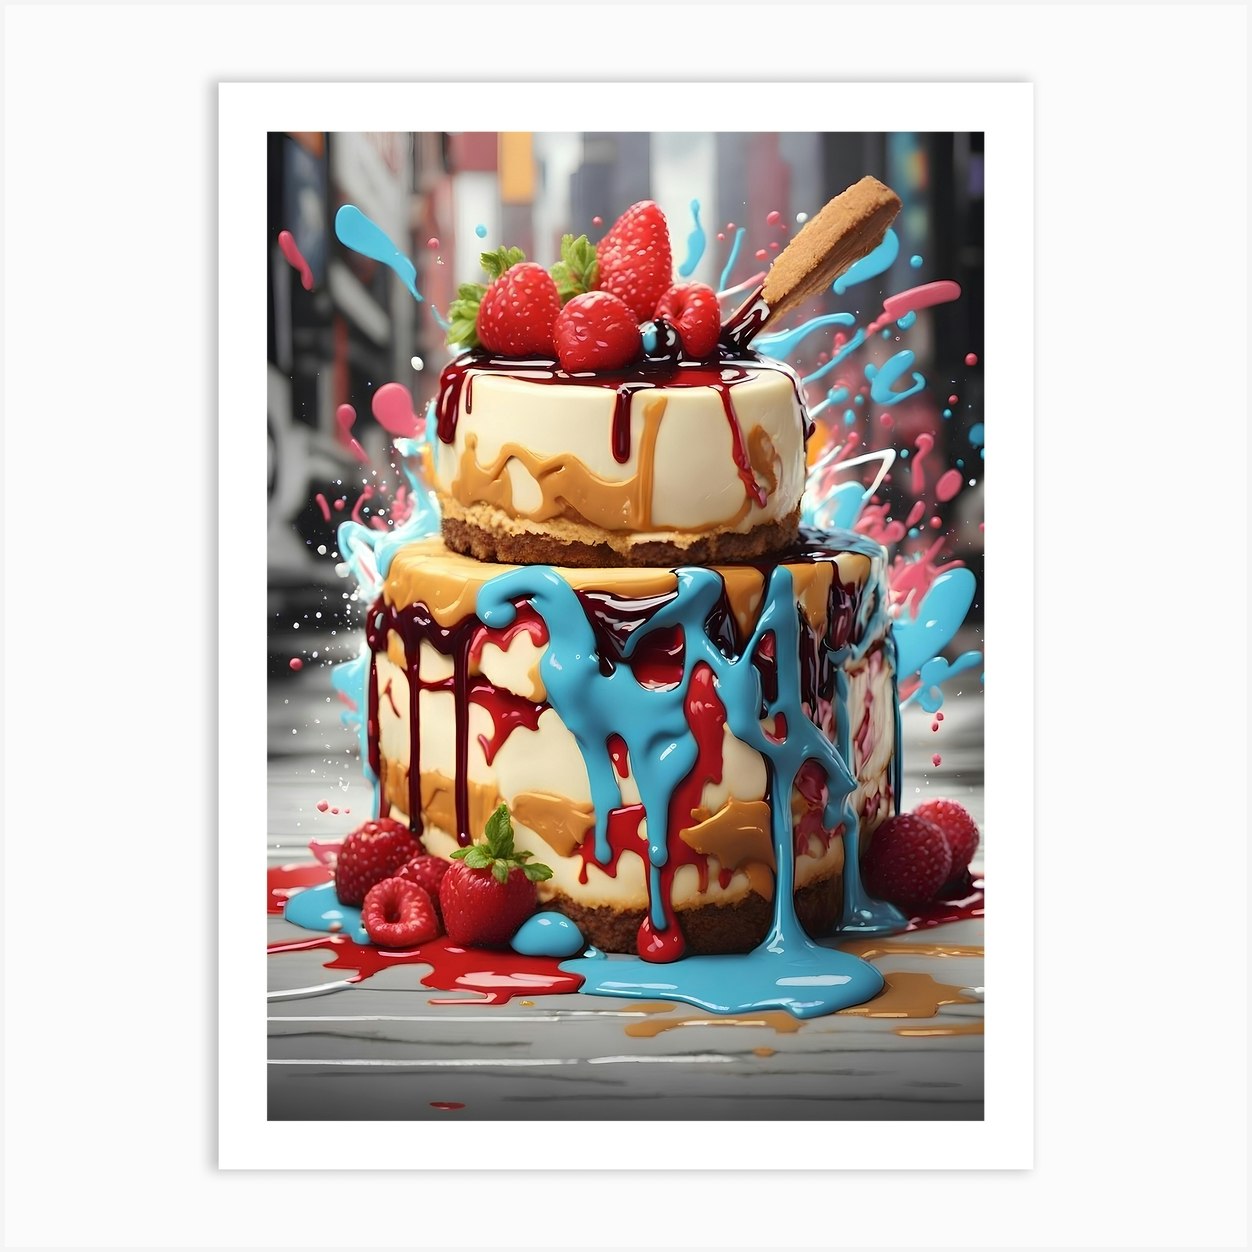 Cake With Splatters Art Print By Ishwar Creation Fy 